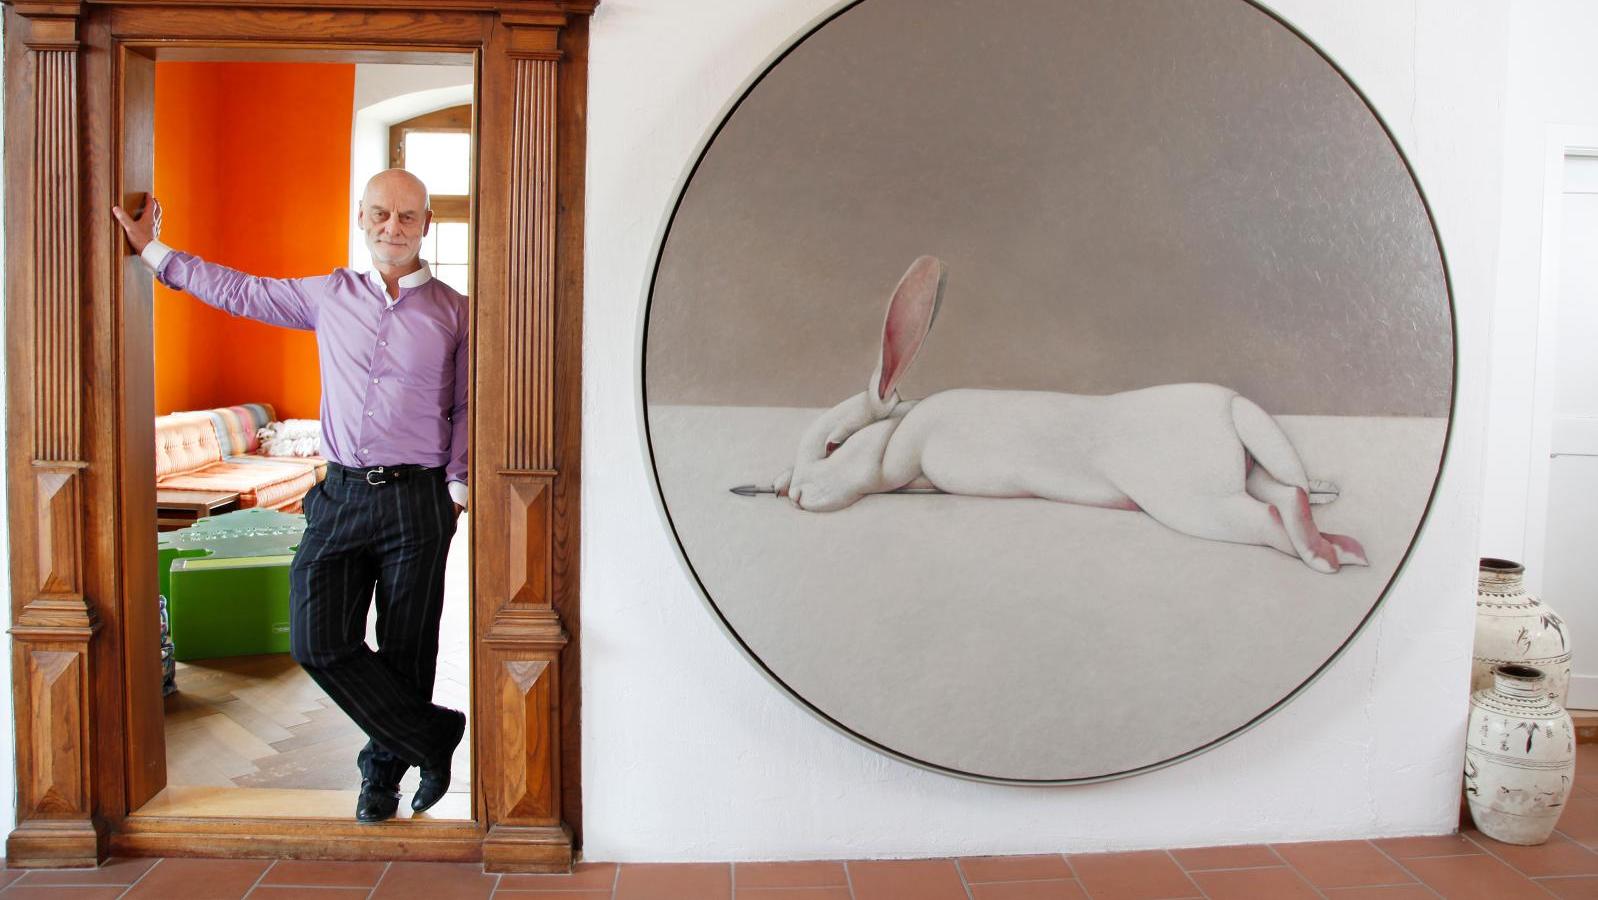 Uli Sigg poses beside a painting by Fan Shao Uli Sigg: When Chinese Art Becomes Globalized 